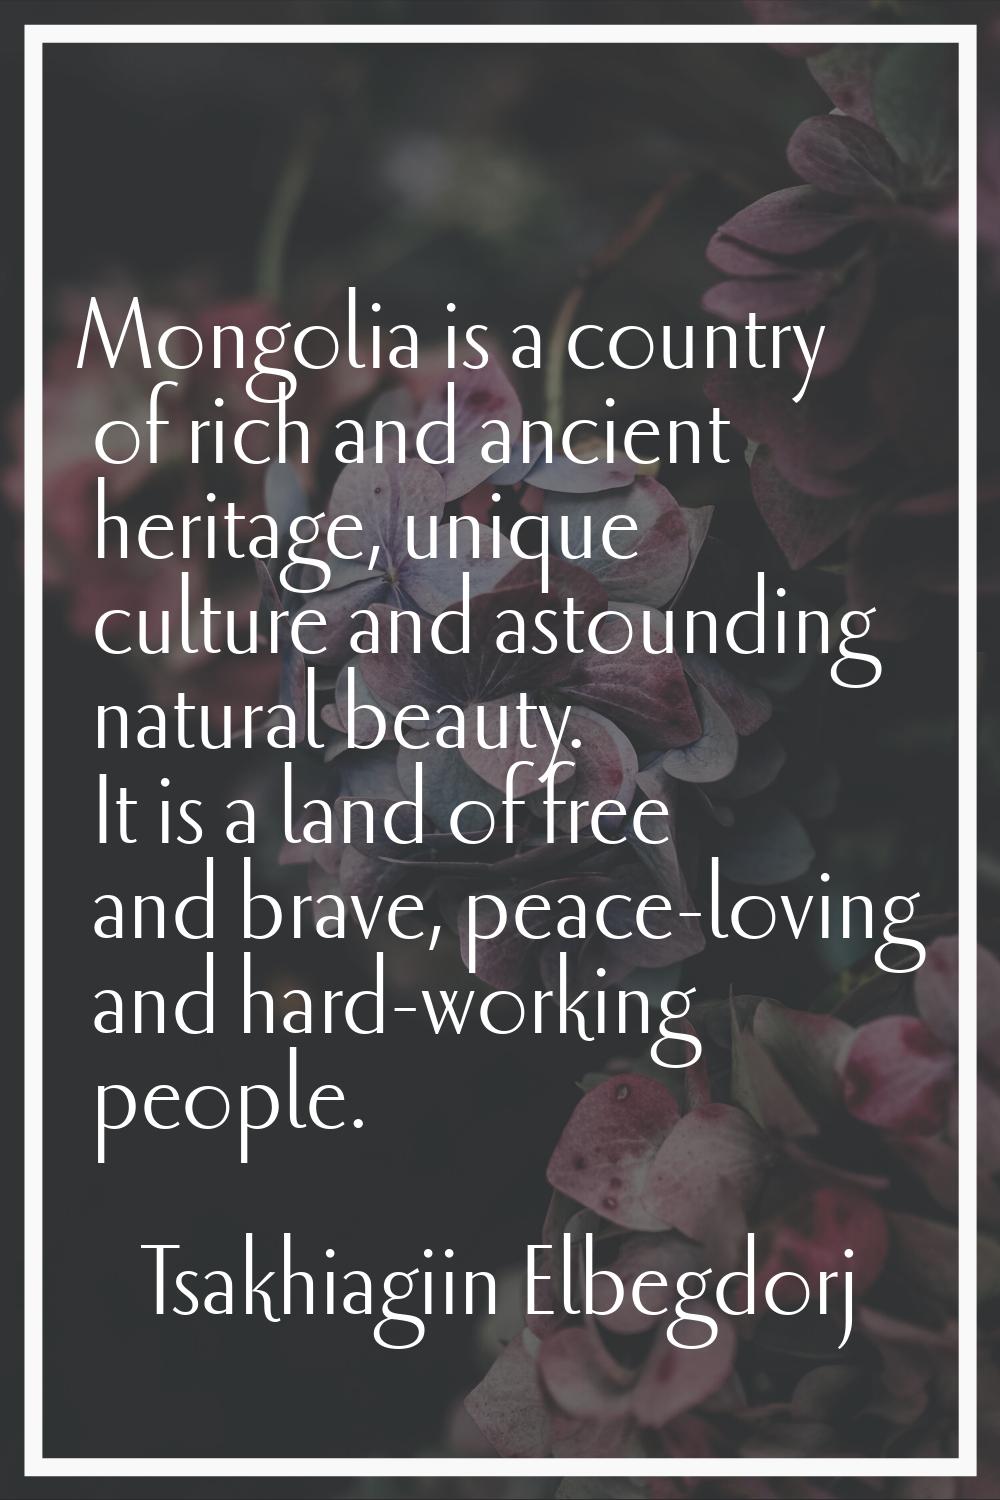 Mongolia is a country of rich and ancient heritage, unique culture and astounding natural beauty. I